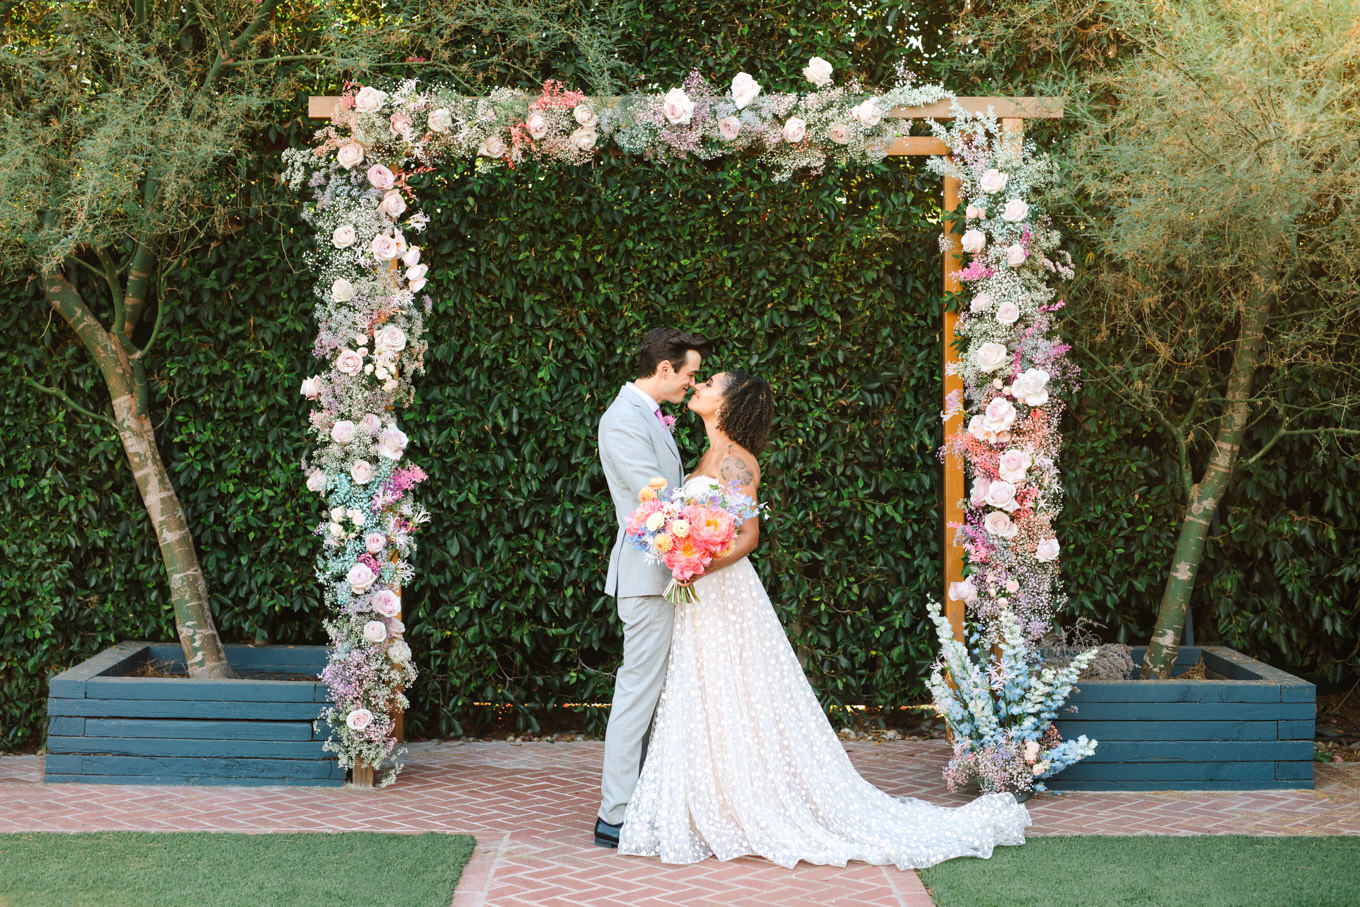 Wedding portrait under rectangular floral arch at Ruby Street | Colorful pop-up micro wedding at The Ruby Street Los Angeles featured on Green Wedding Shoes | Colorful and elevated photography for fun-loving couples in Southern California | #colorfulwedding #popupwedding #weddingphotography #microwedding Source: Mary Costa Photography | Los Angeles